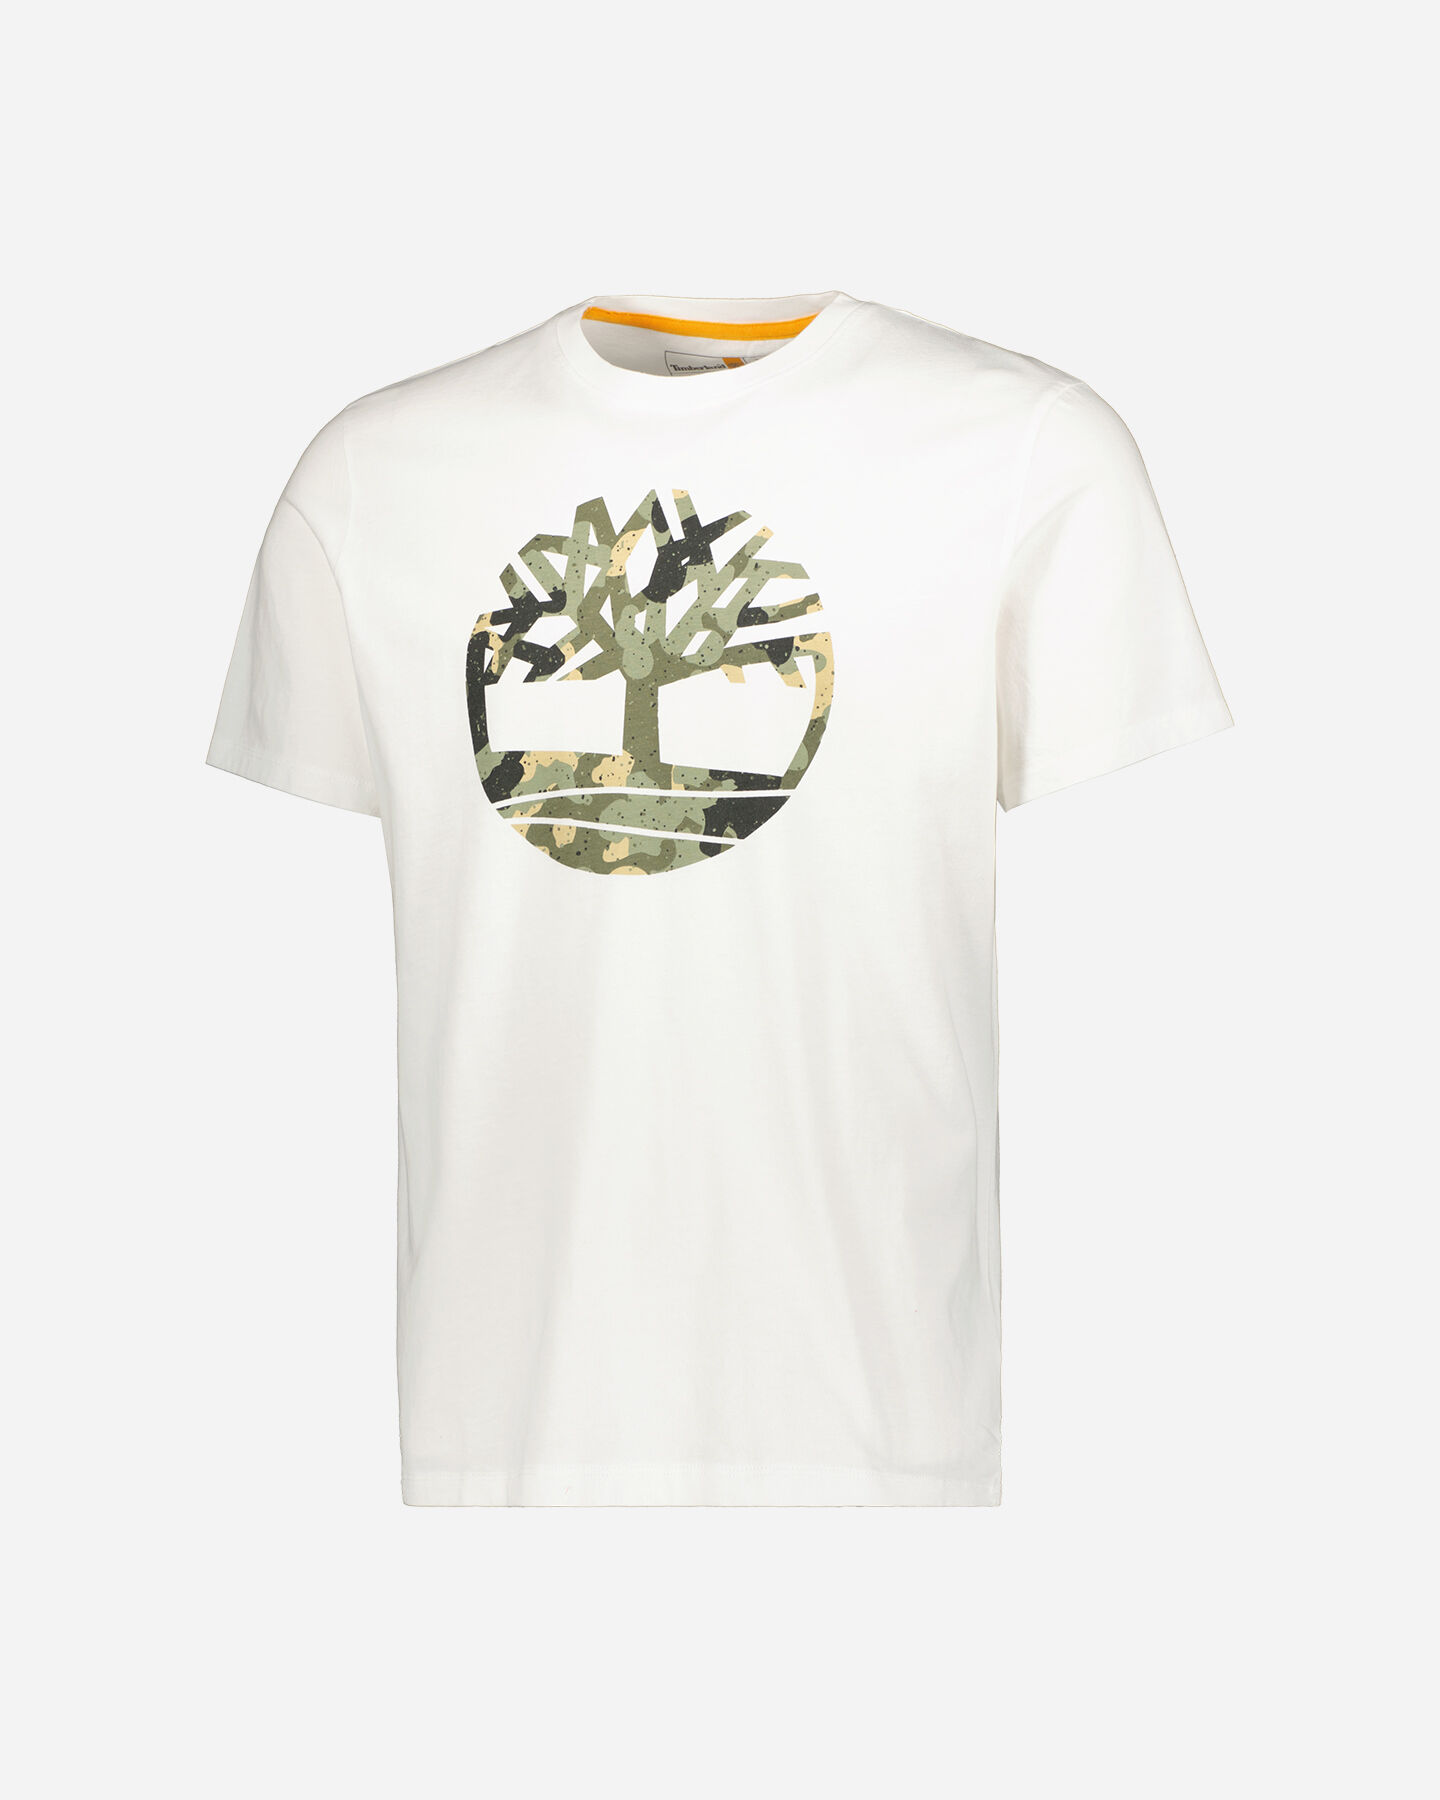  T-Shirt TIMBERLAND CAMO TREE T M S4104754|1001|S scatto 0